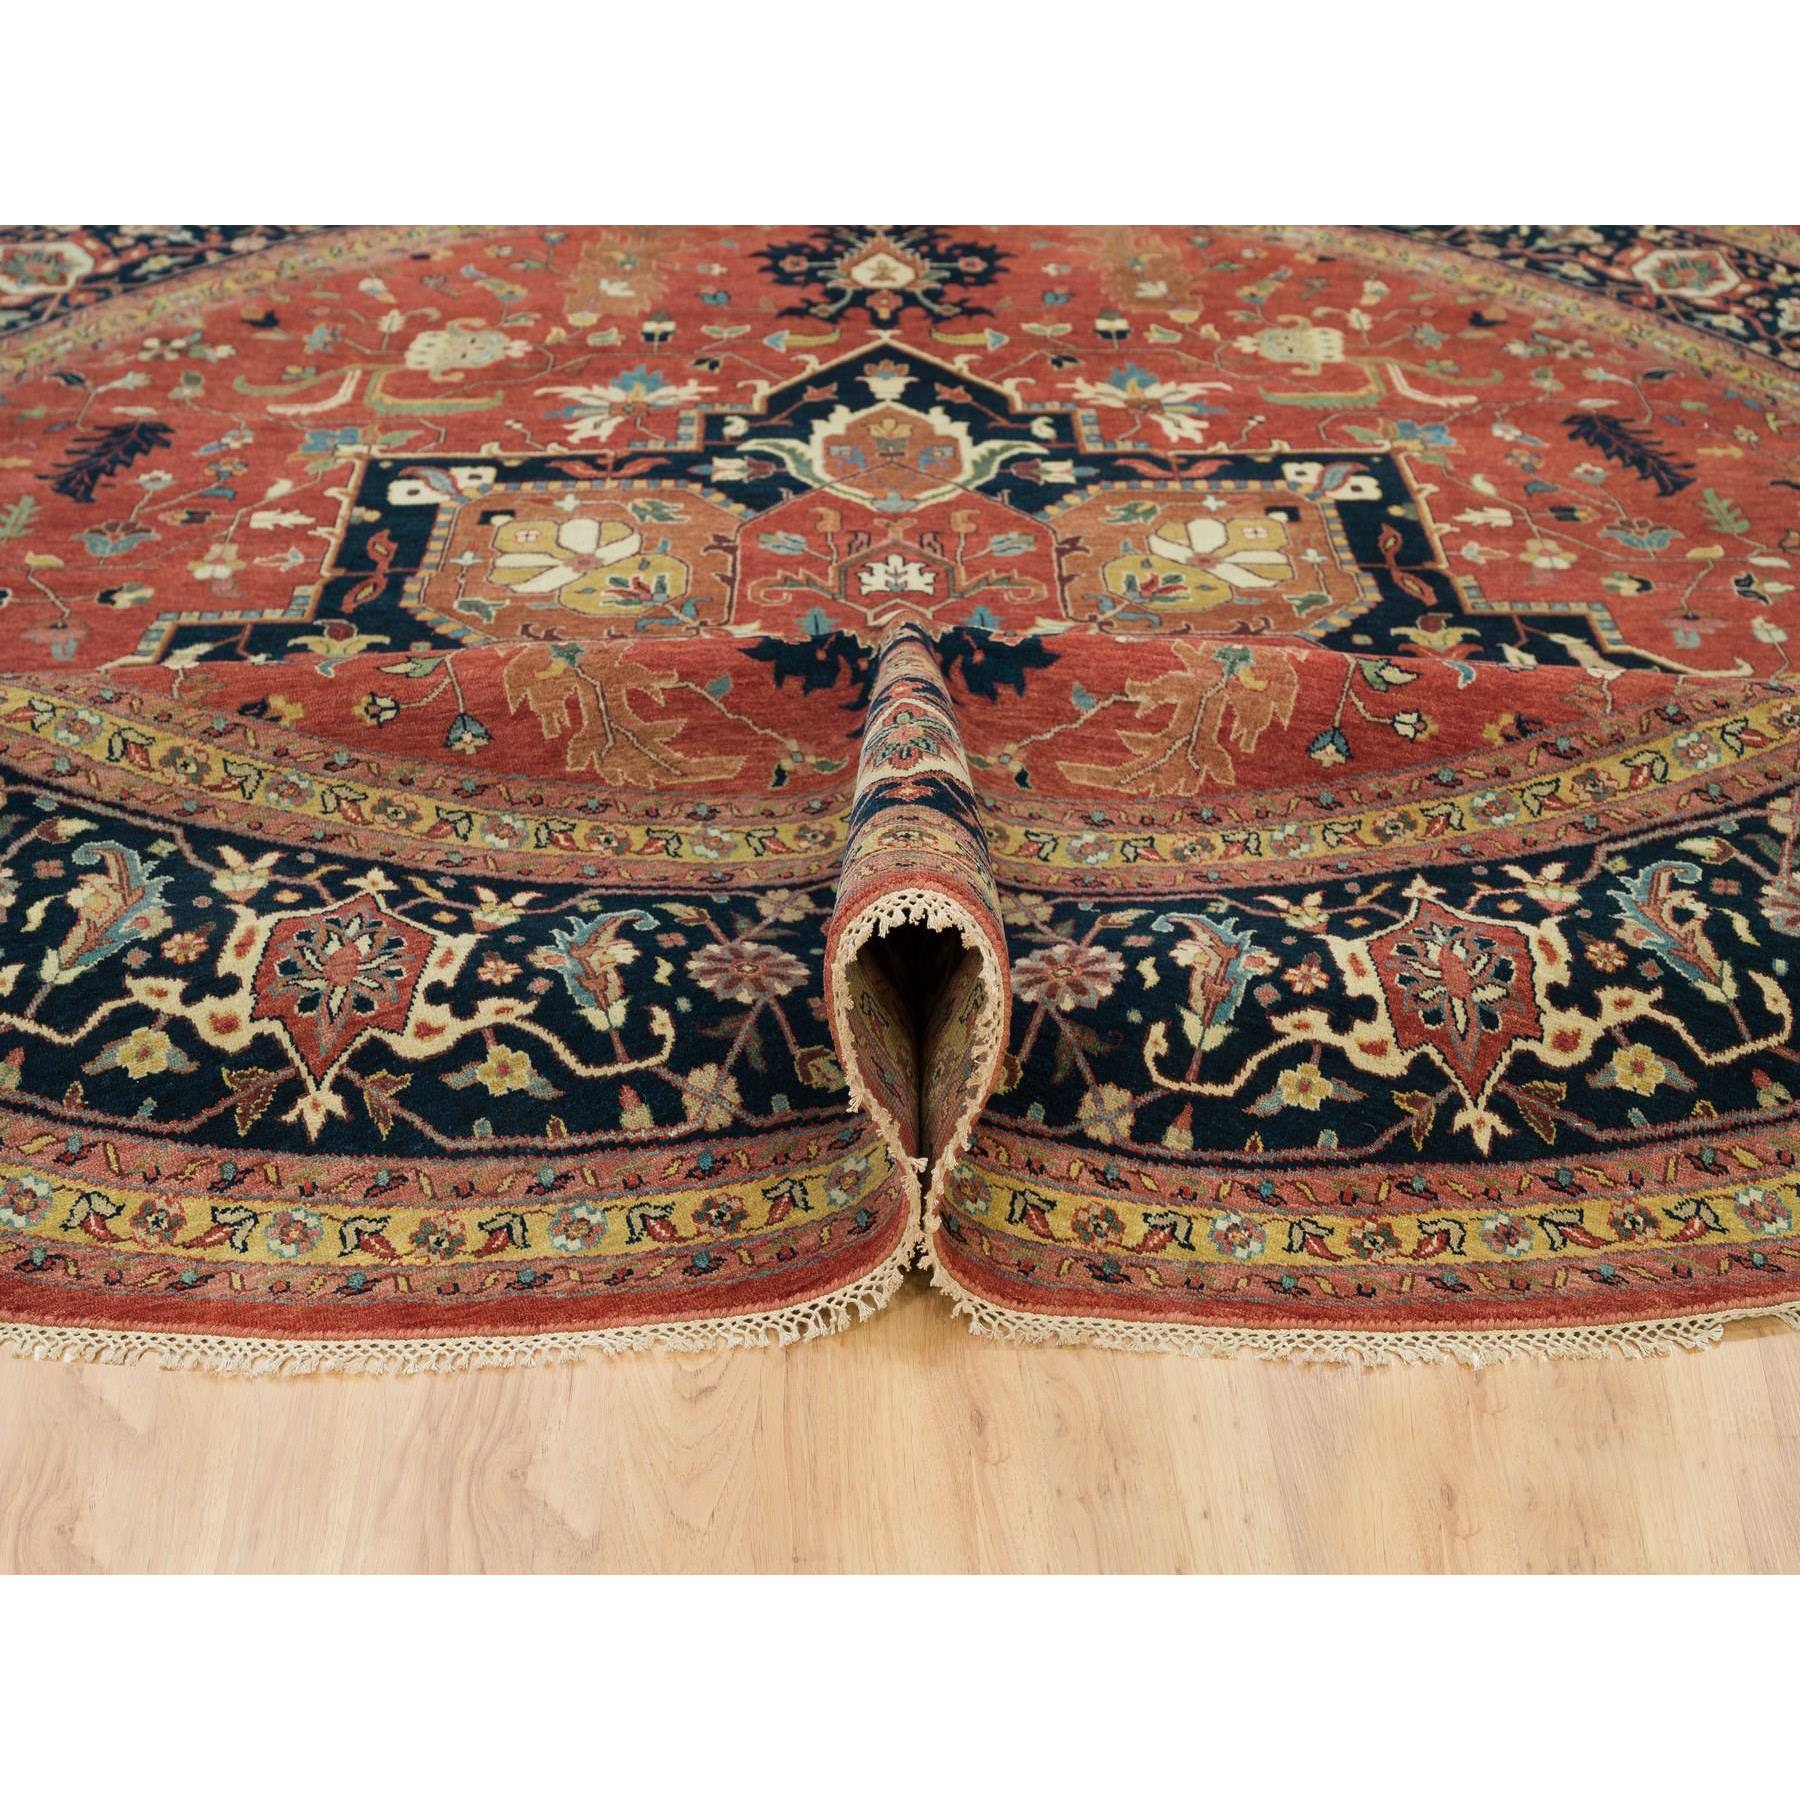 12'x12' Japanese Carmine Red, Soft and Lush, Dense Weave, Hand Woven, Antiqued Fine Heriz Re-Creation, Vegetable Dyes, 100% Wool, Round Oriental Rug 